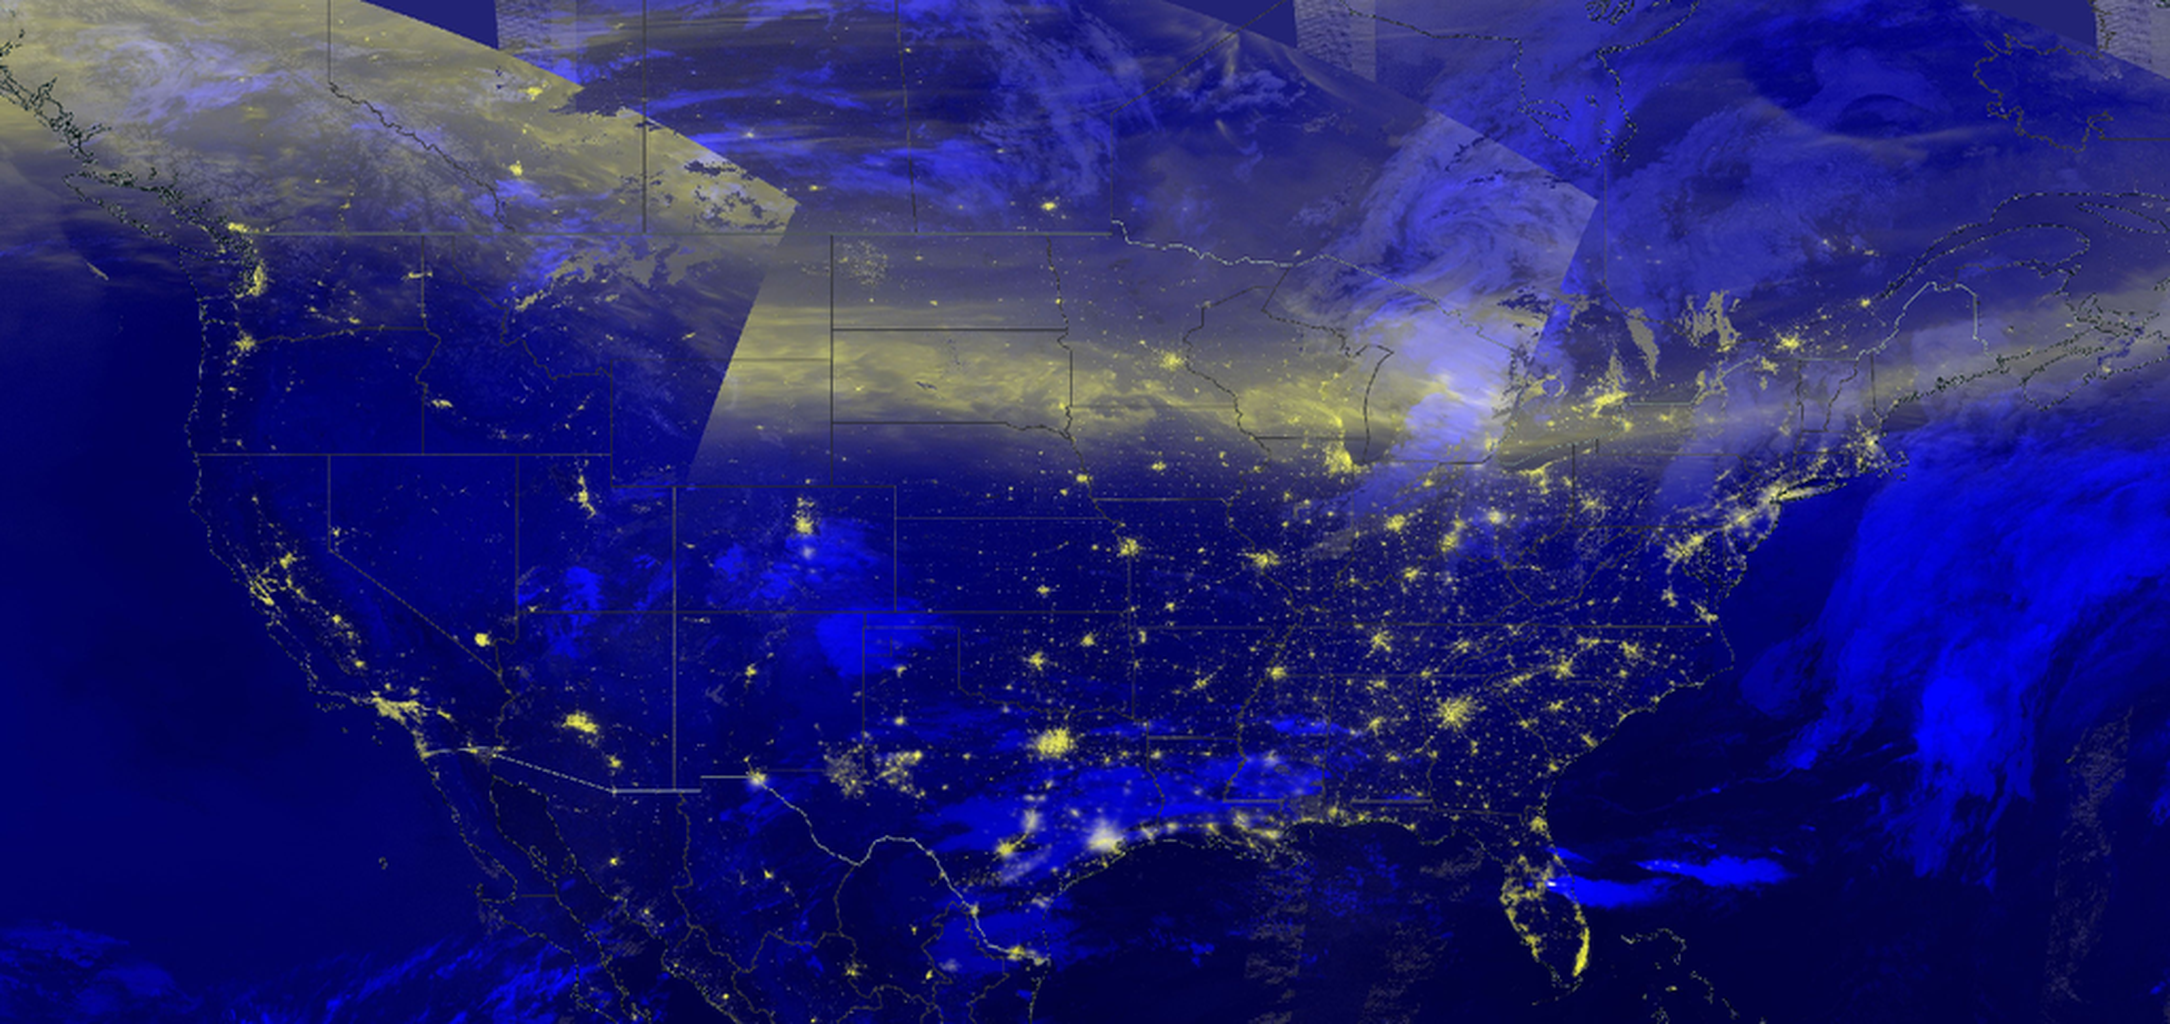 The image shows a false color image of an Aurora event over North America.